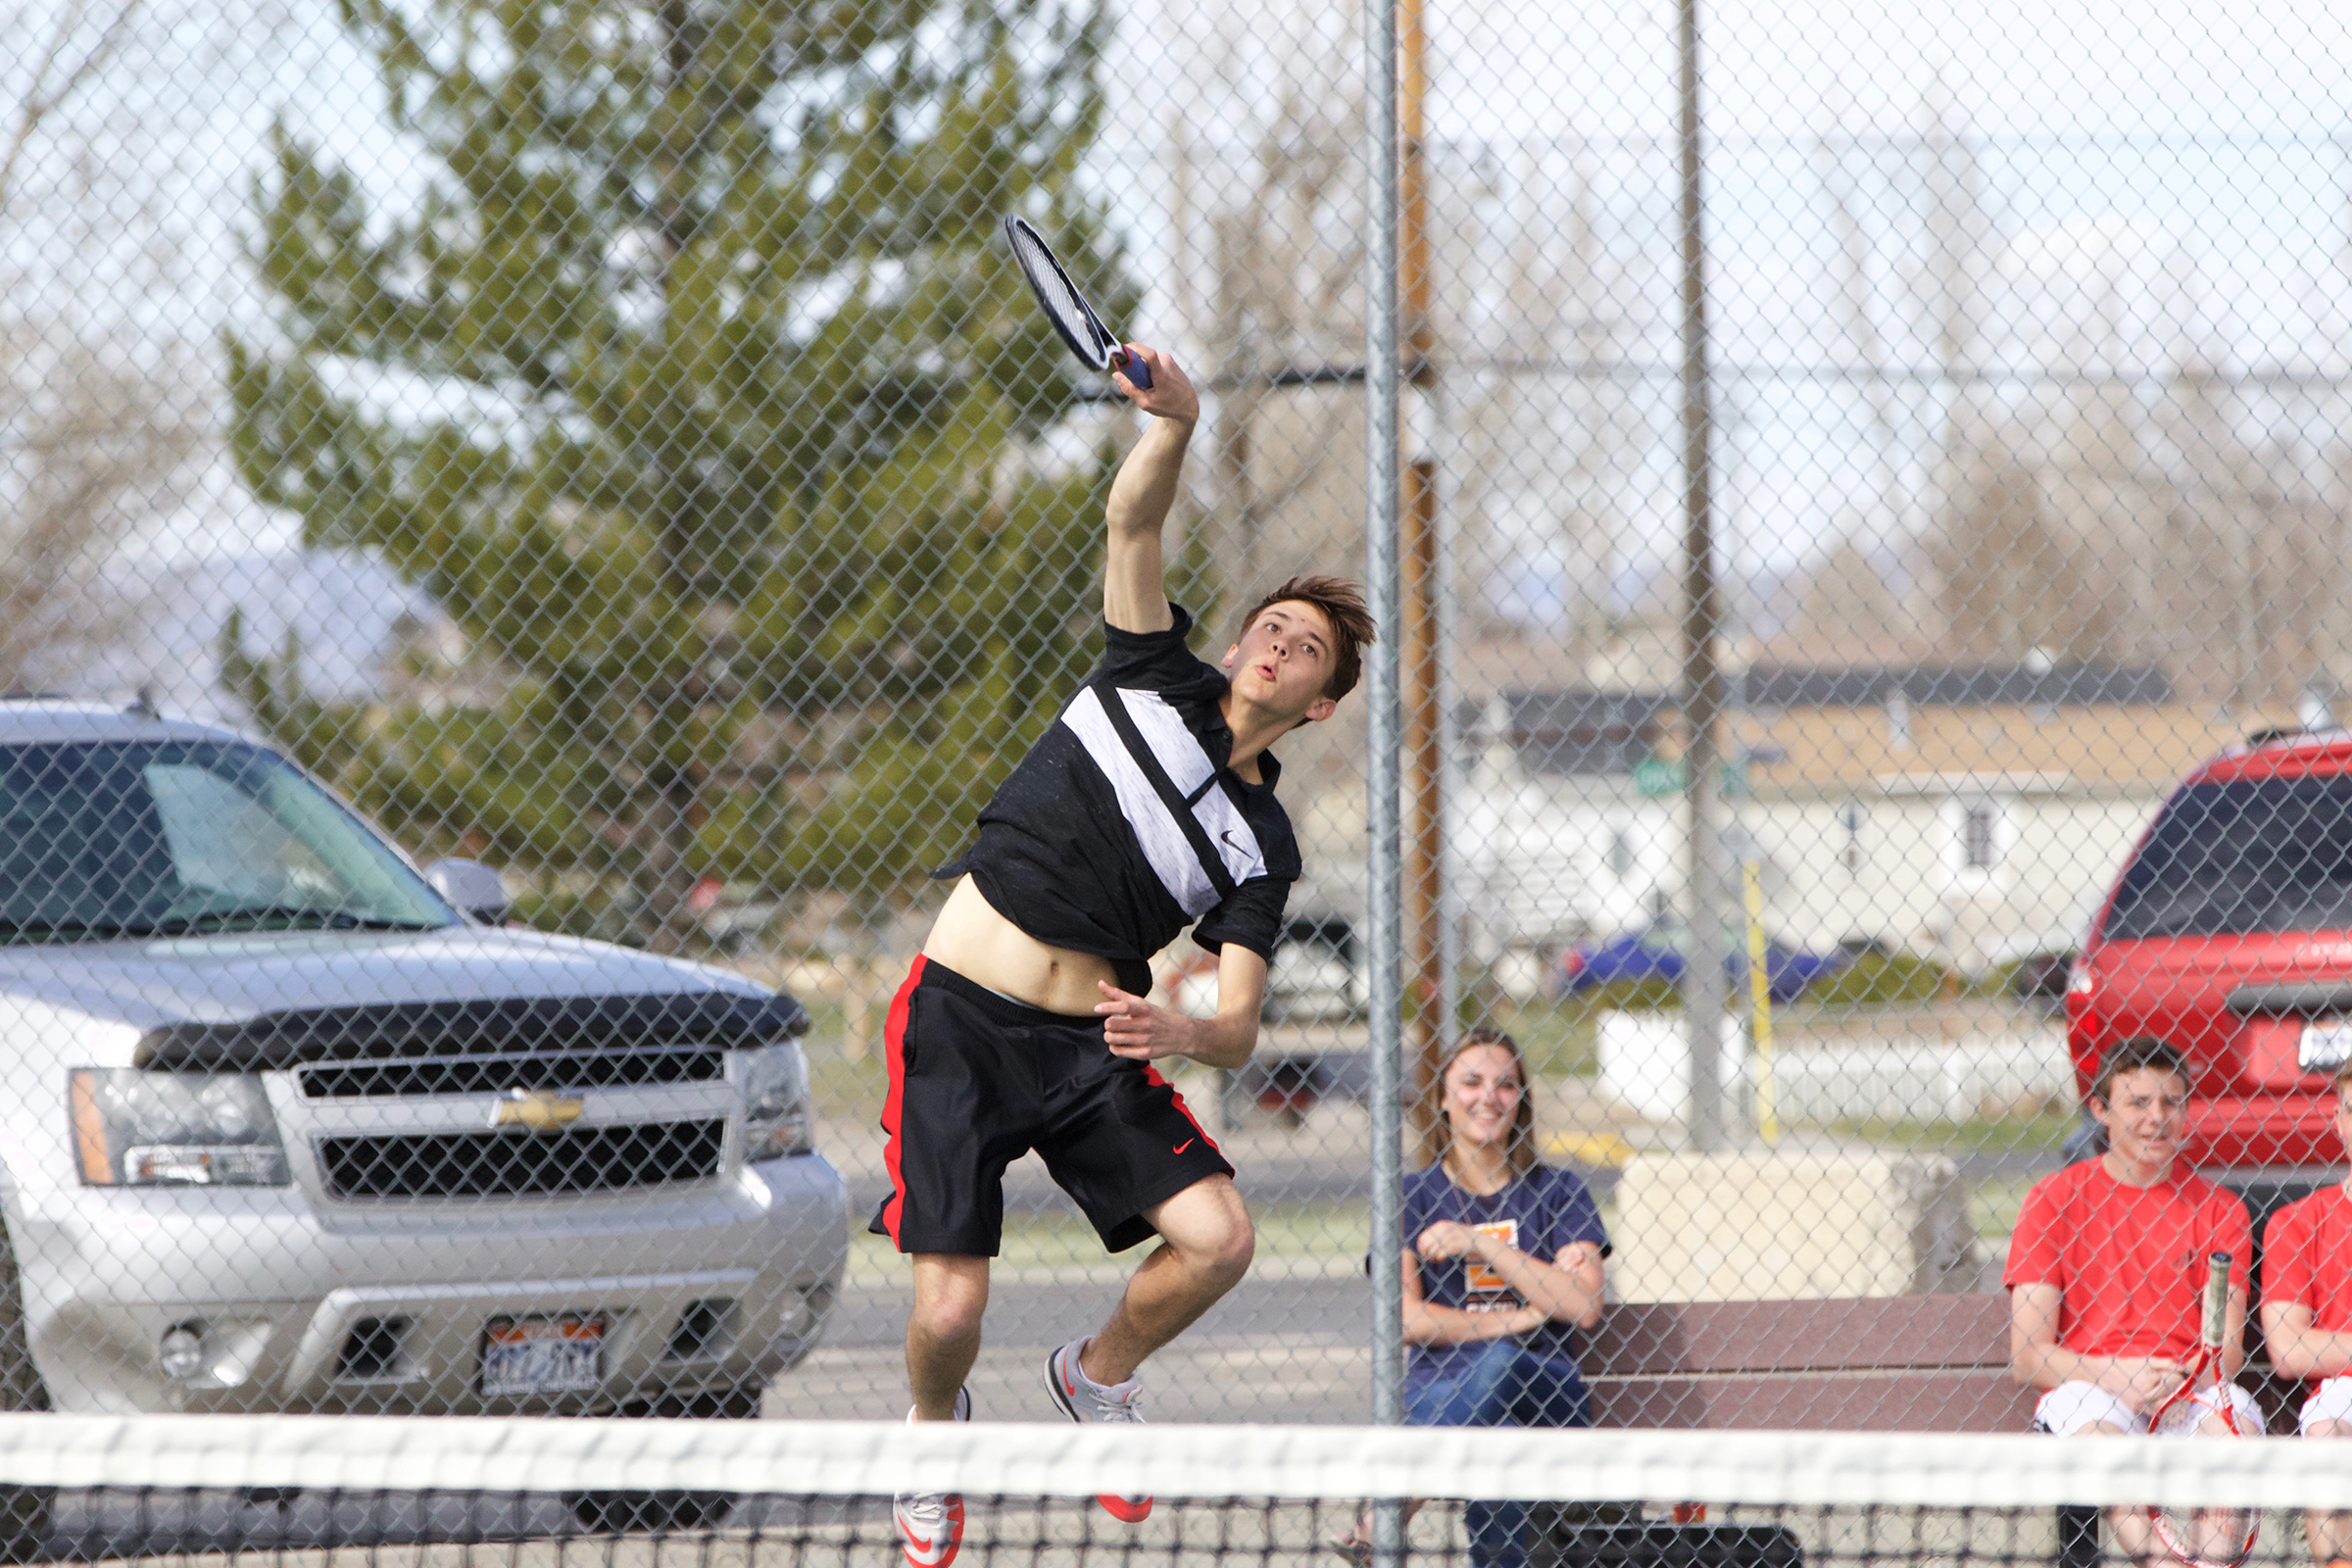 Boys Tennis gets off to strong 2-0 start to season